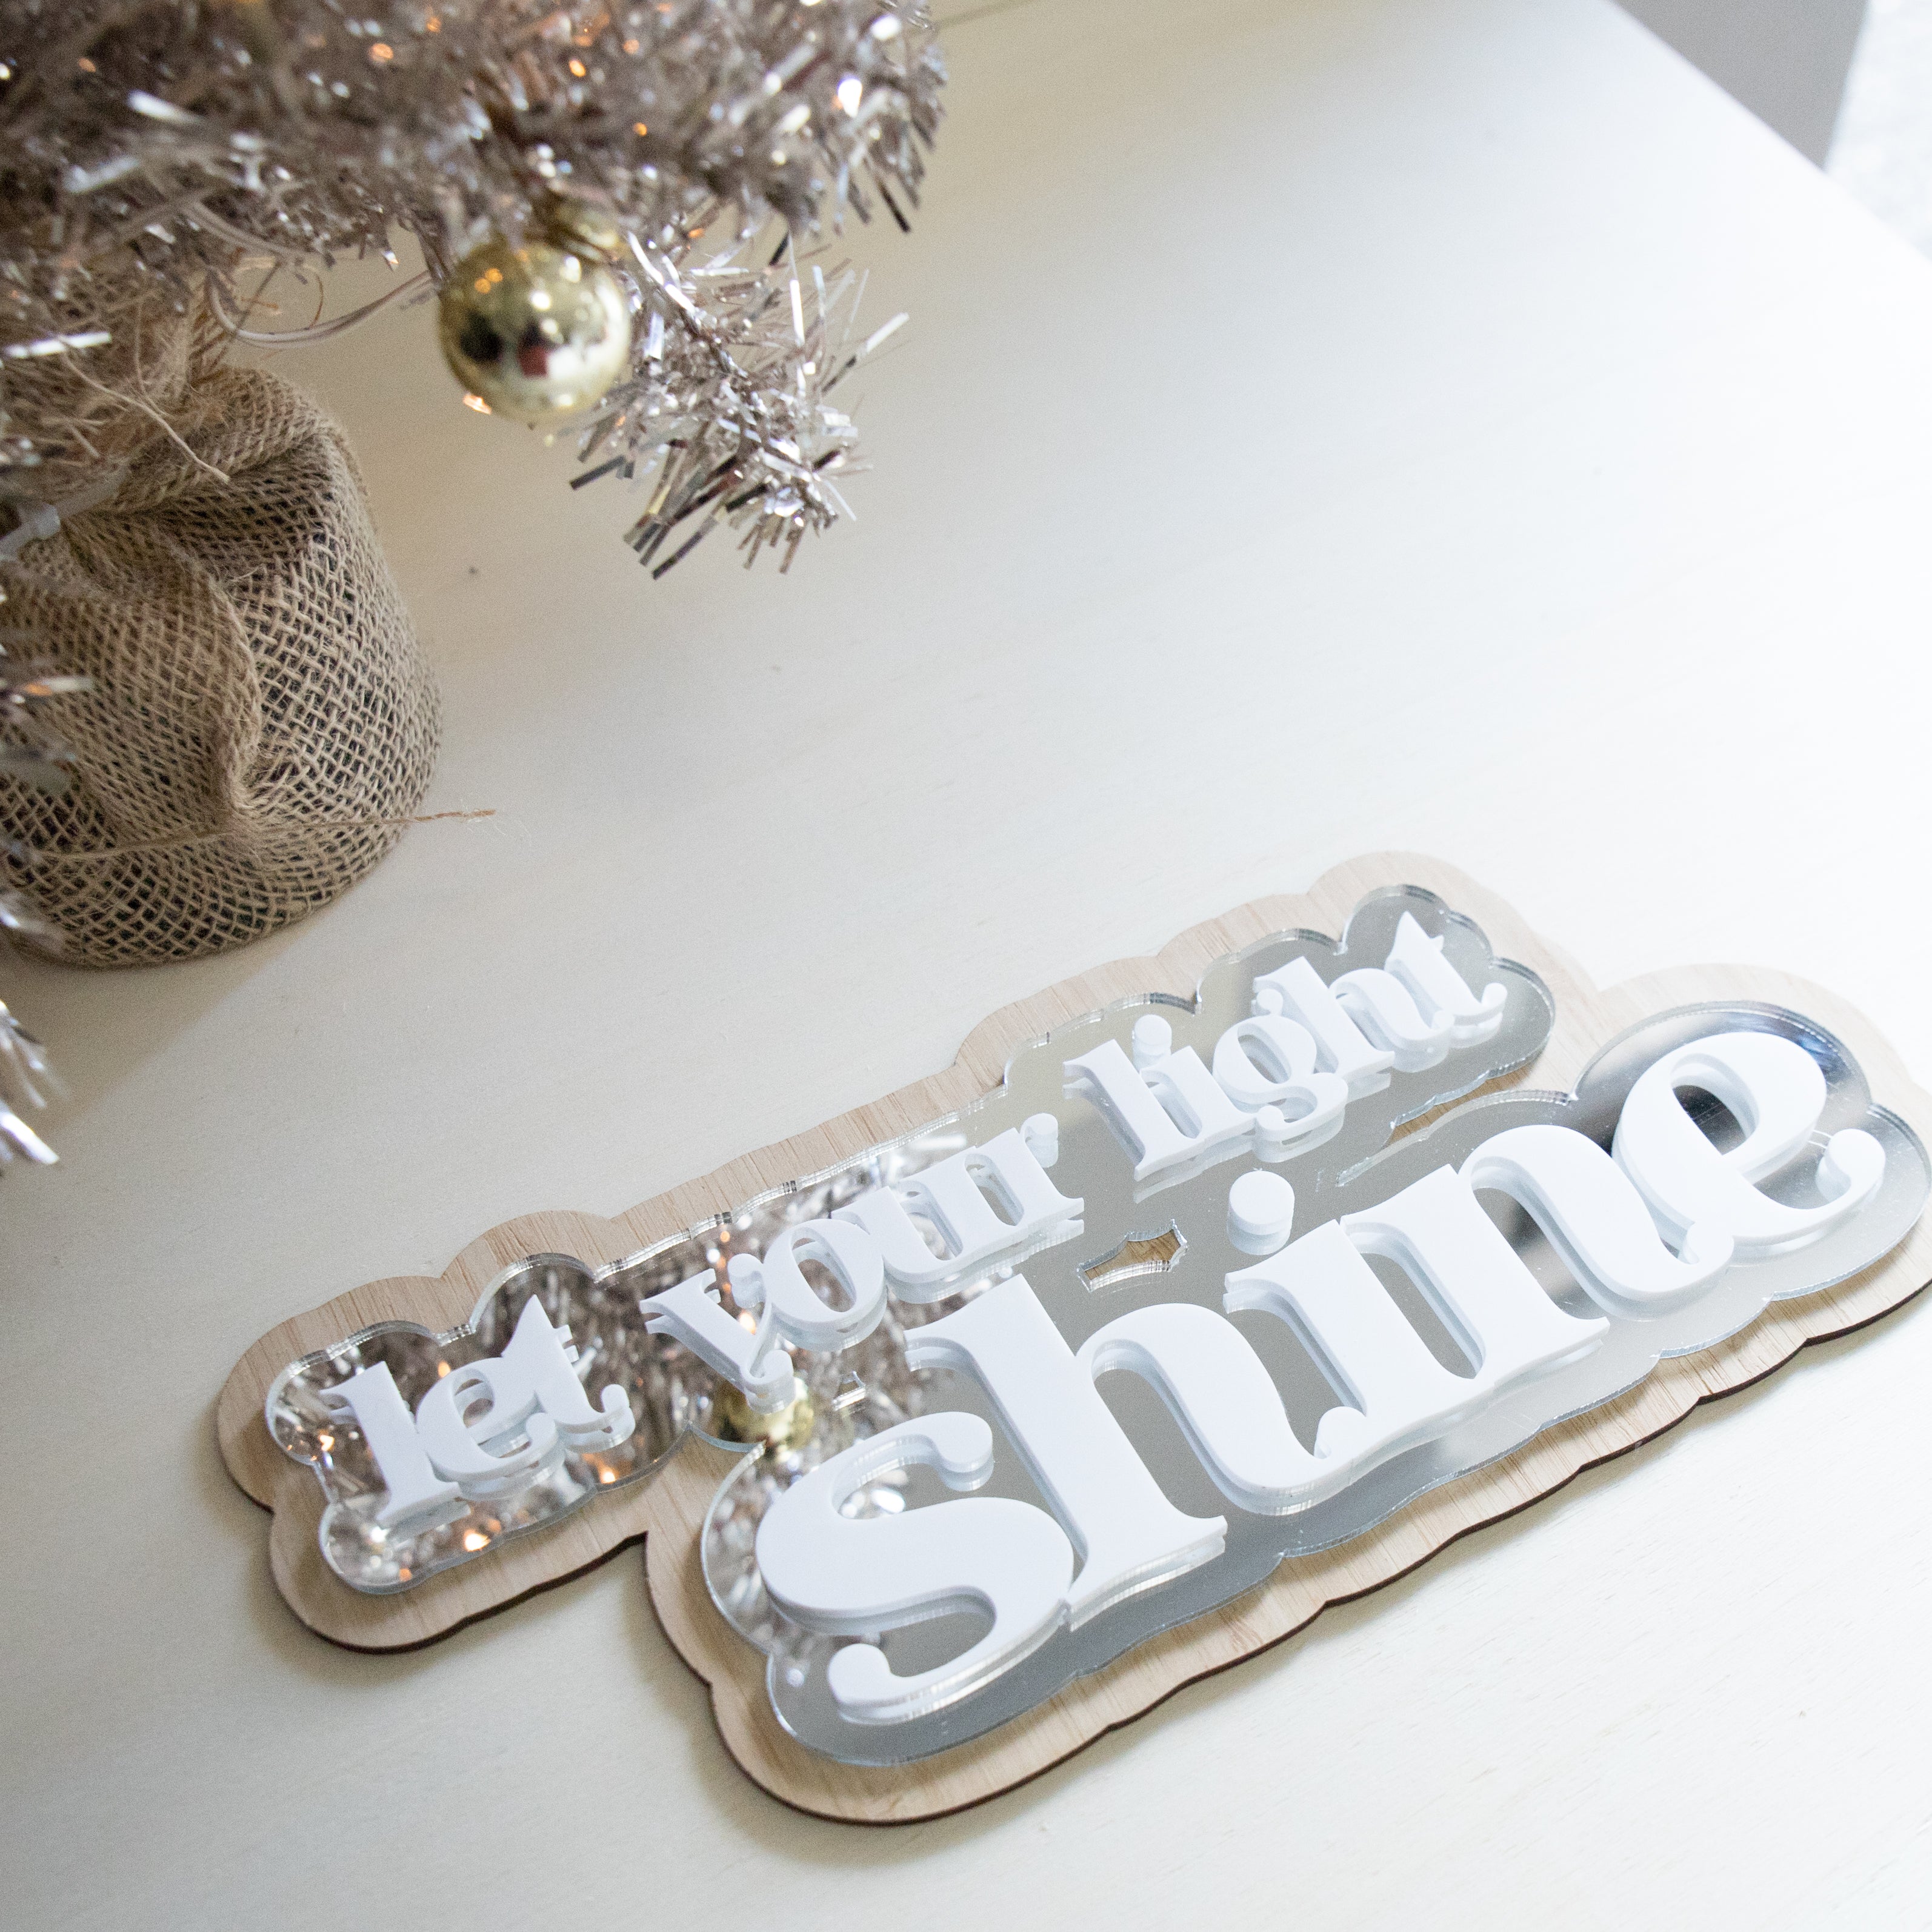 'Let Your Light Shine' Layered Plaque